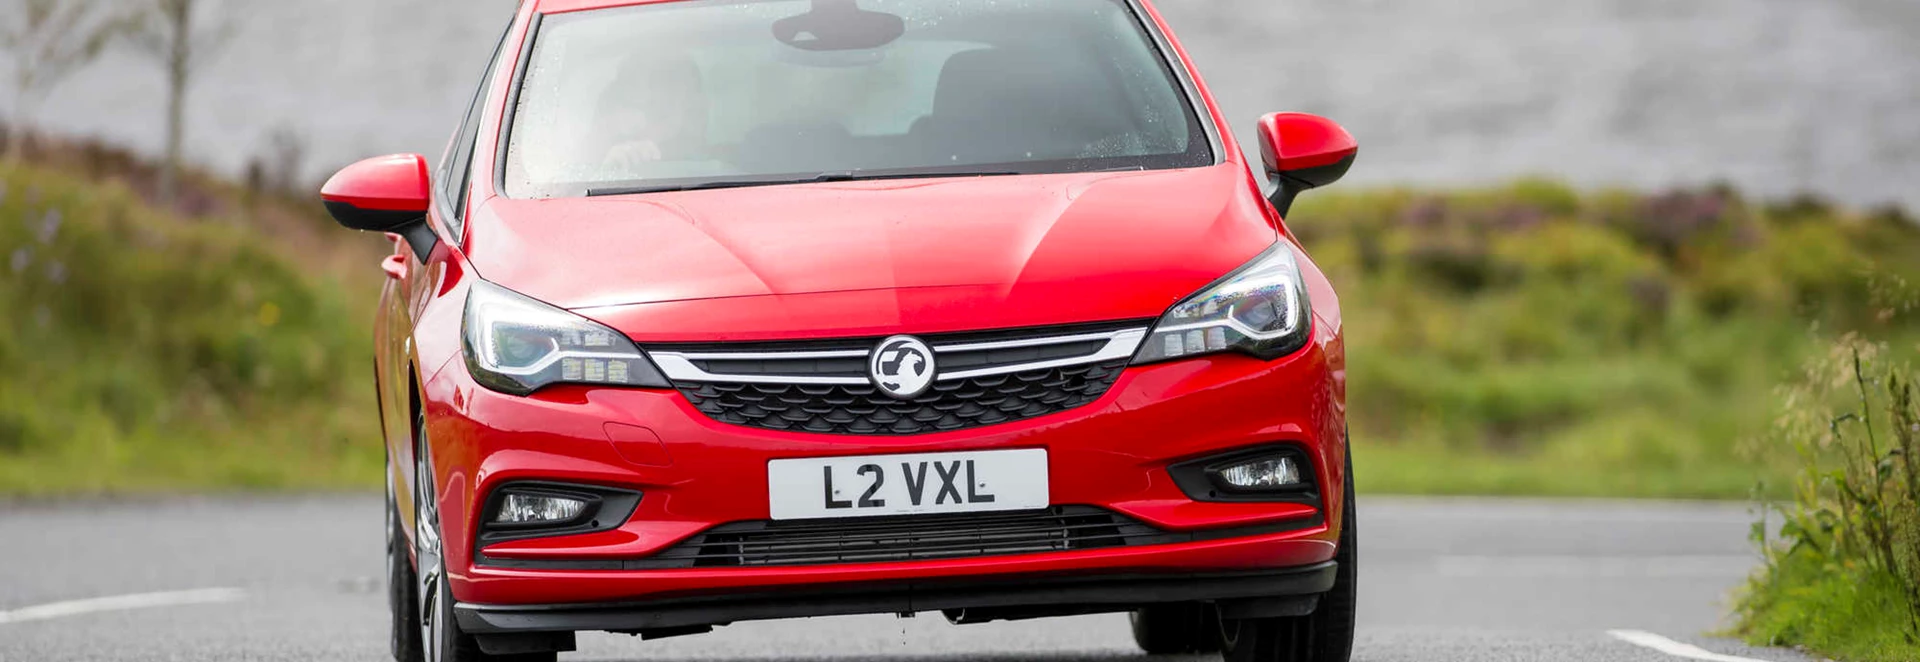 Vauxhall Astra hatchback review 